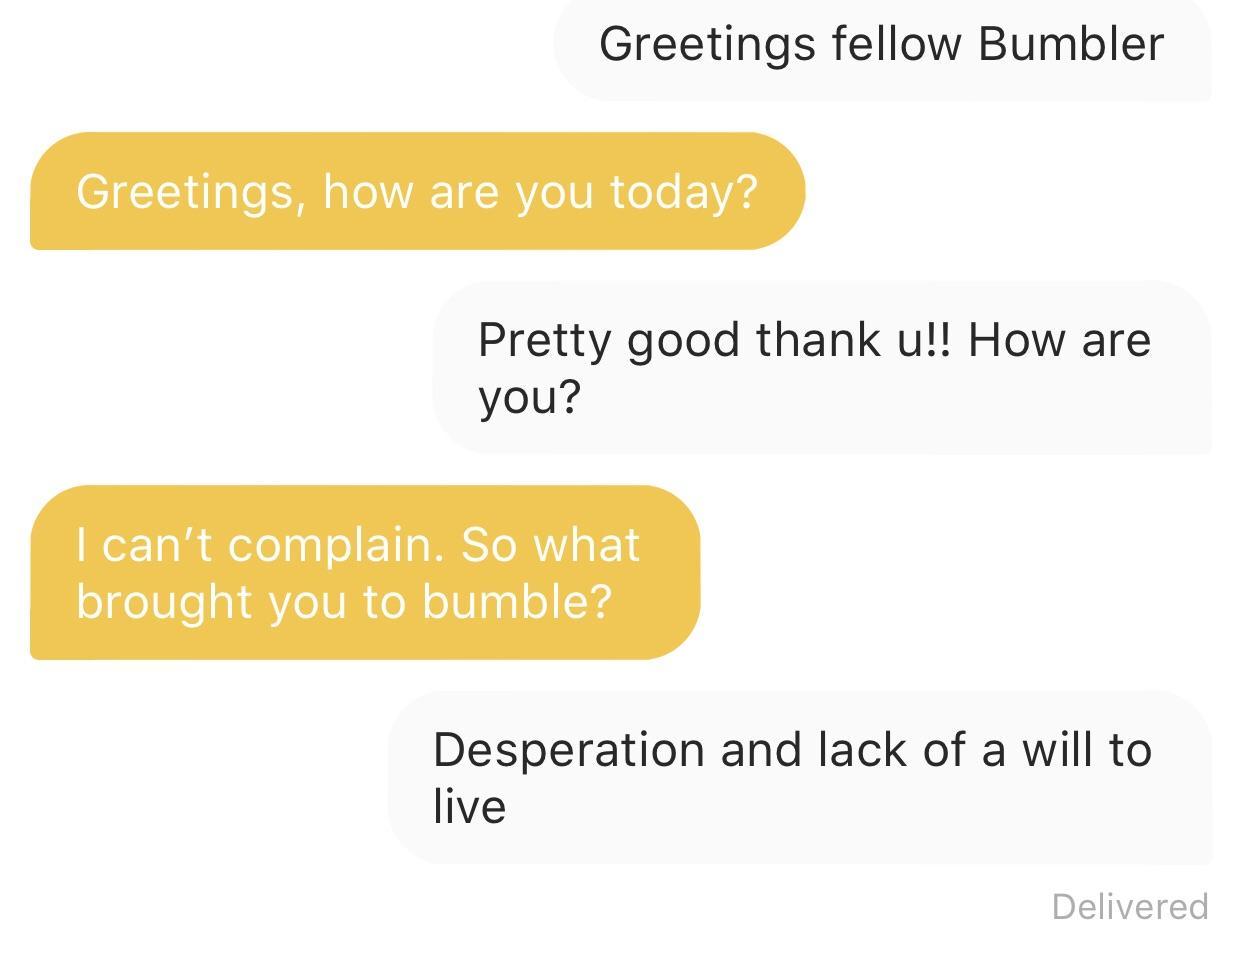 angle - Greetings fellow Bumbler Greetings, how are you today? Pretty good thank u!! How are you? I can't complain. So what brought you to bumble? Desperation and lack of a will to live Delivered